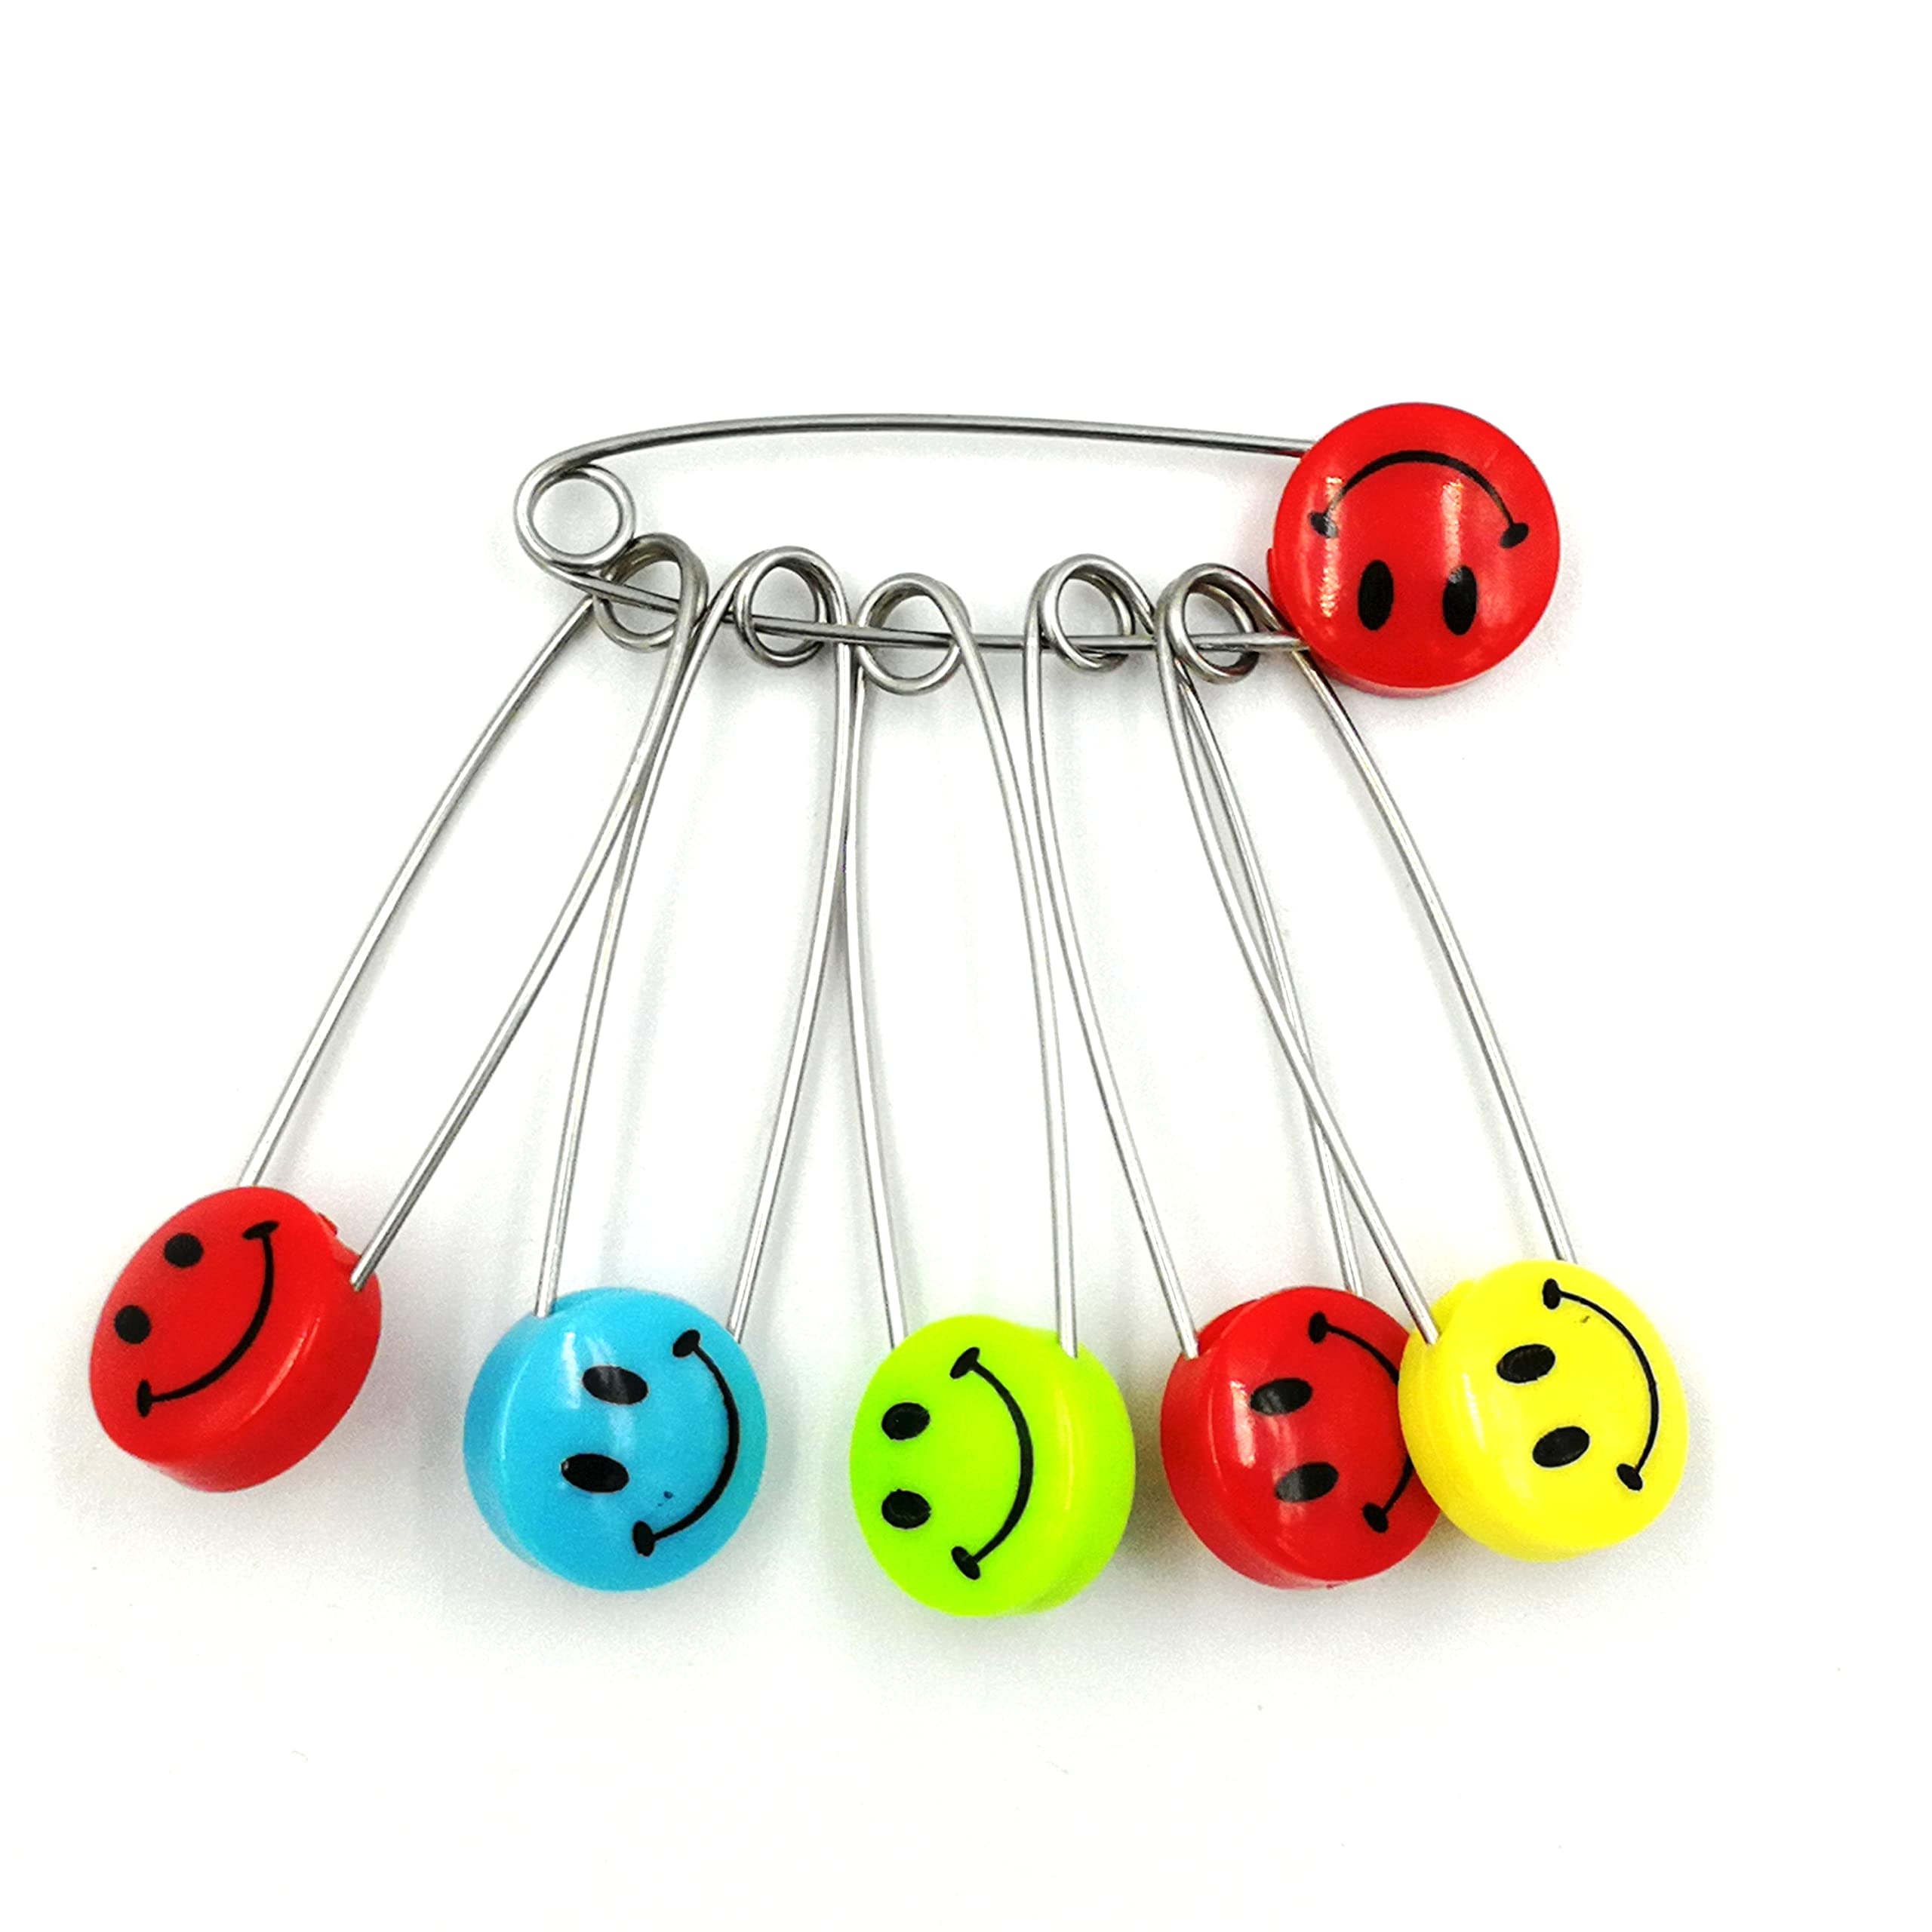 Diaper Pins, 50 Baby Safety Pins Cute Smile Face Stainless Steel